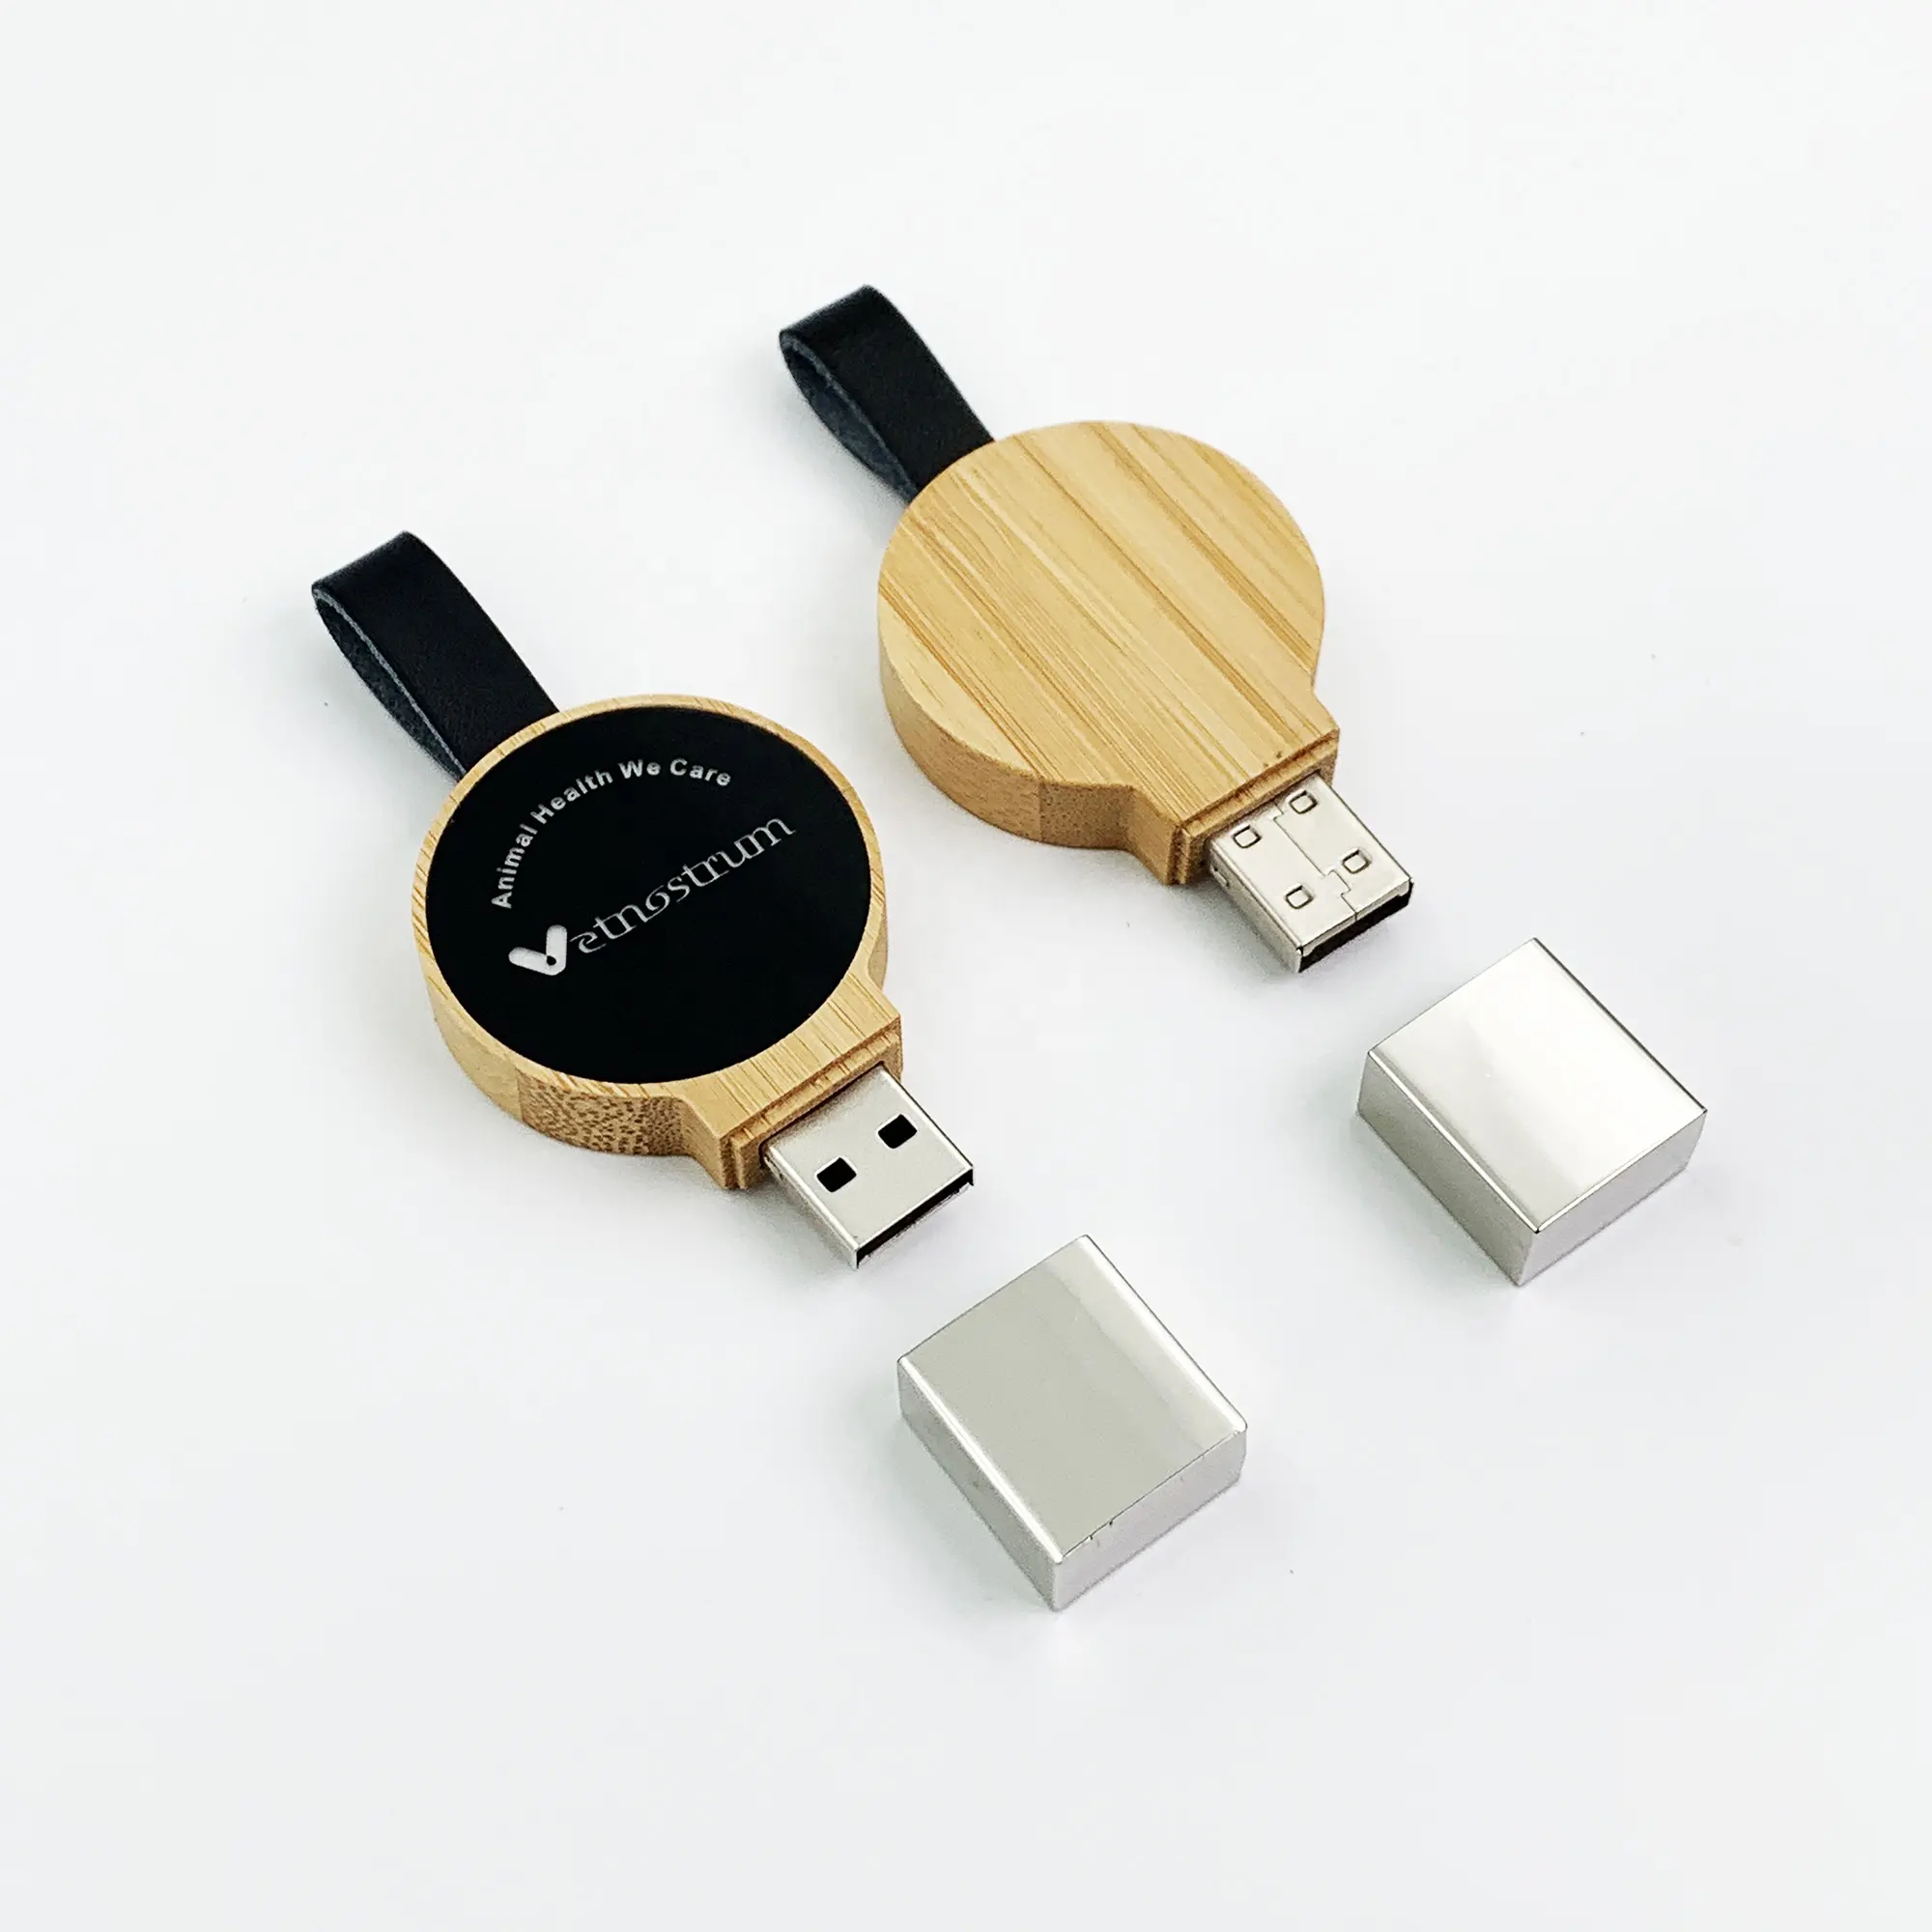 AiAude LED engrave logo Customized OEM Logo promotion gift 8gb 16gb 32gb 64gb 128gb wooden usb flash drive with box Thumb drive